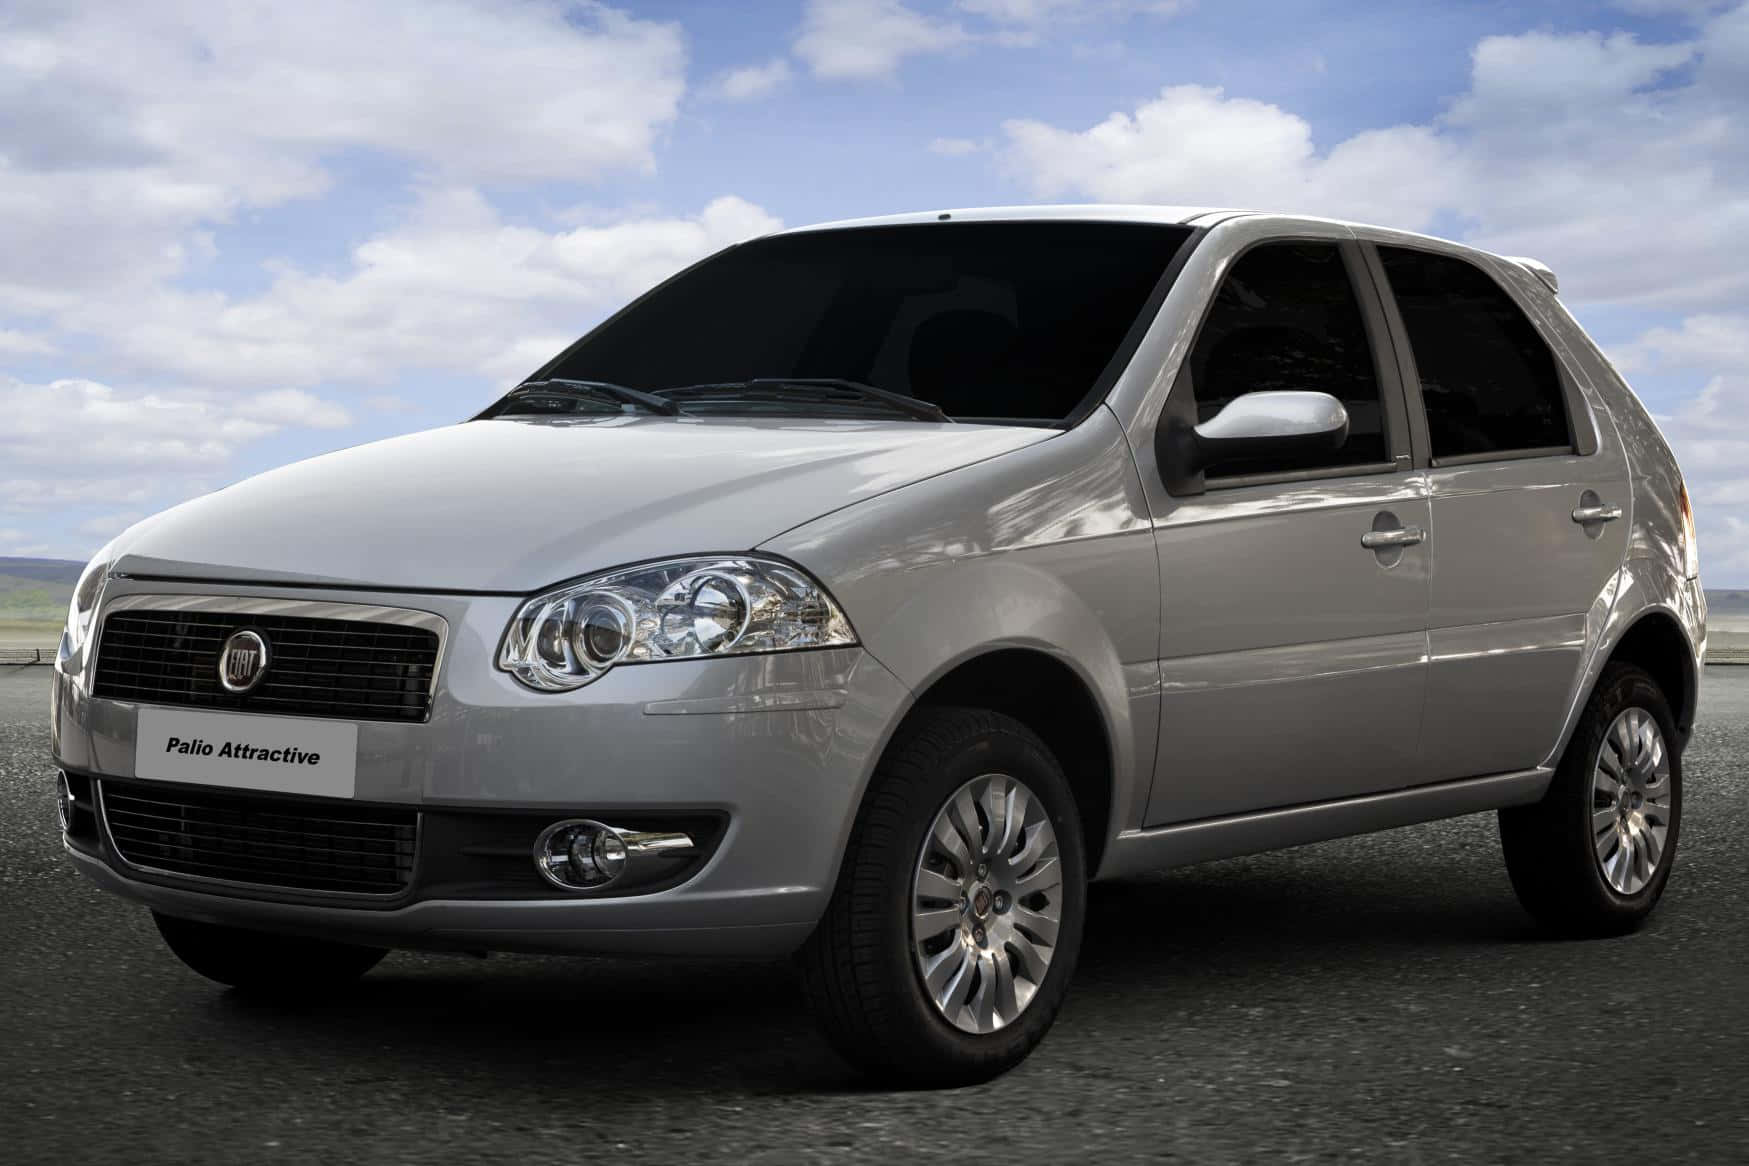 Fiat Palio: A Closer Look at the Iconic Hatchback Wallpaper